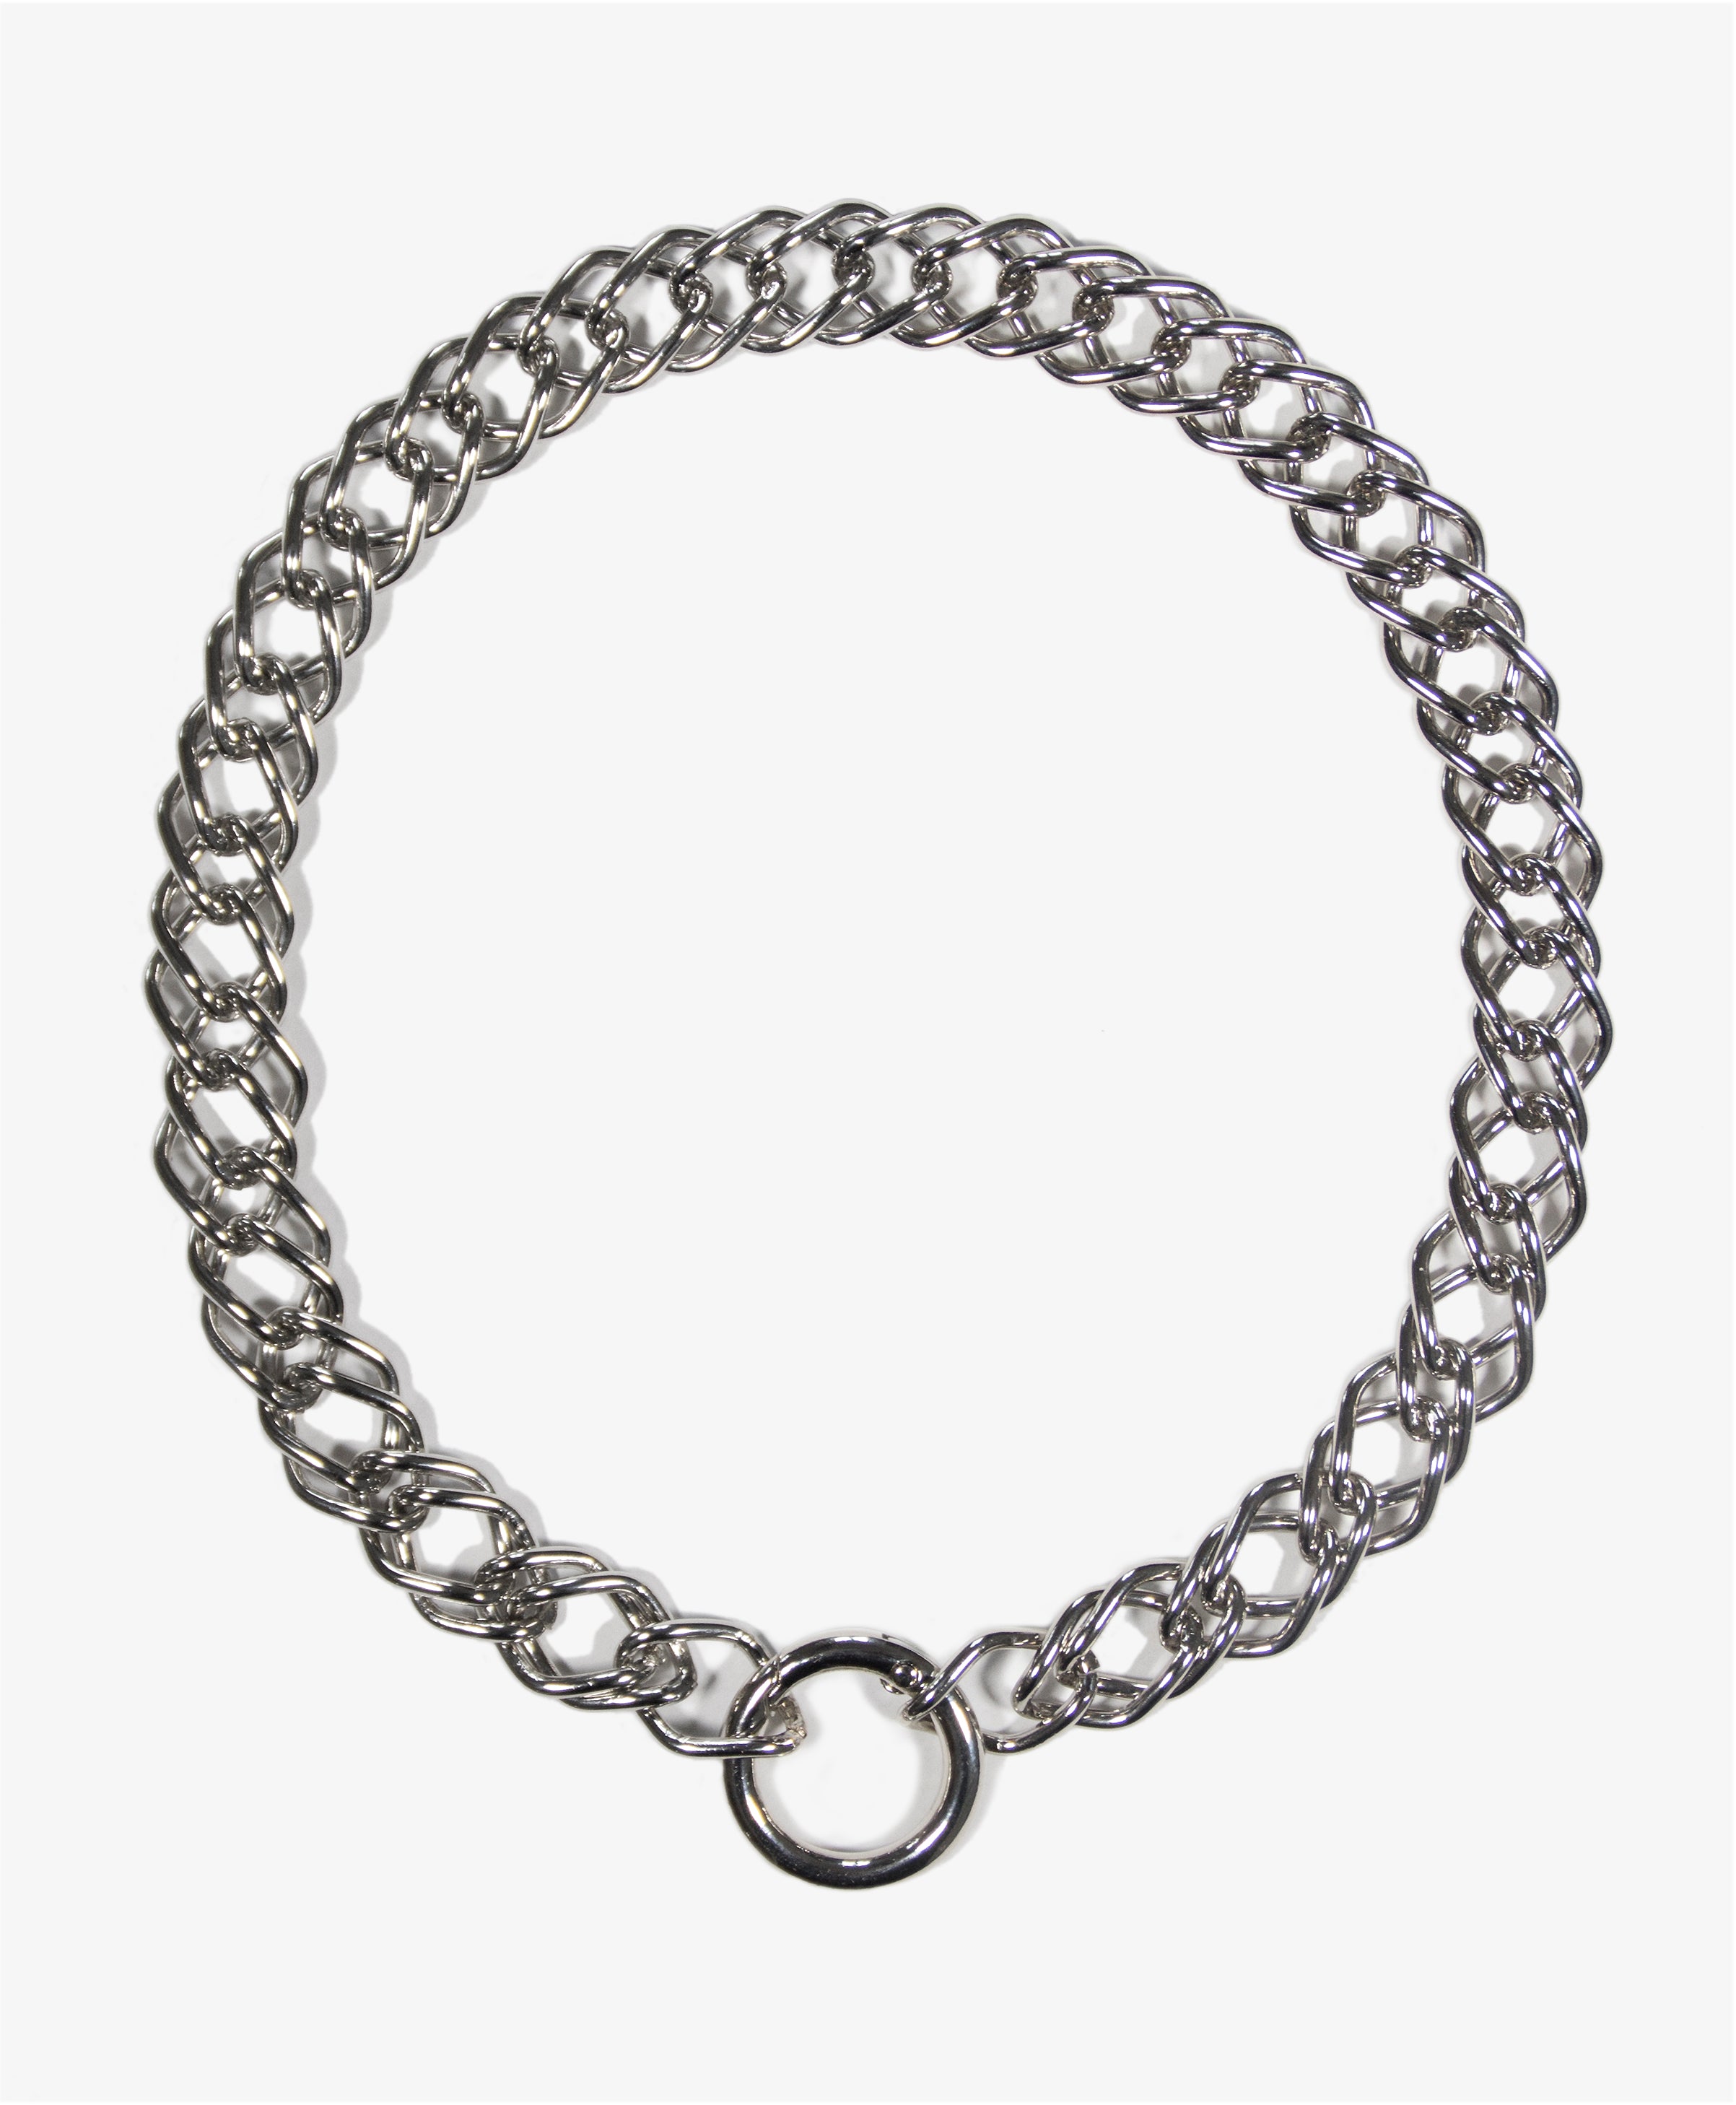 llayers-mens-women-jewelry-silver-stainlesssteel-choker-chain-necklace-unchained-005-Brooklyn-New-York-1